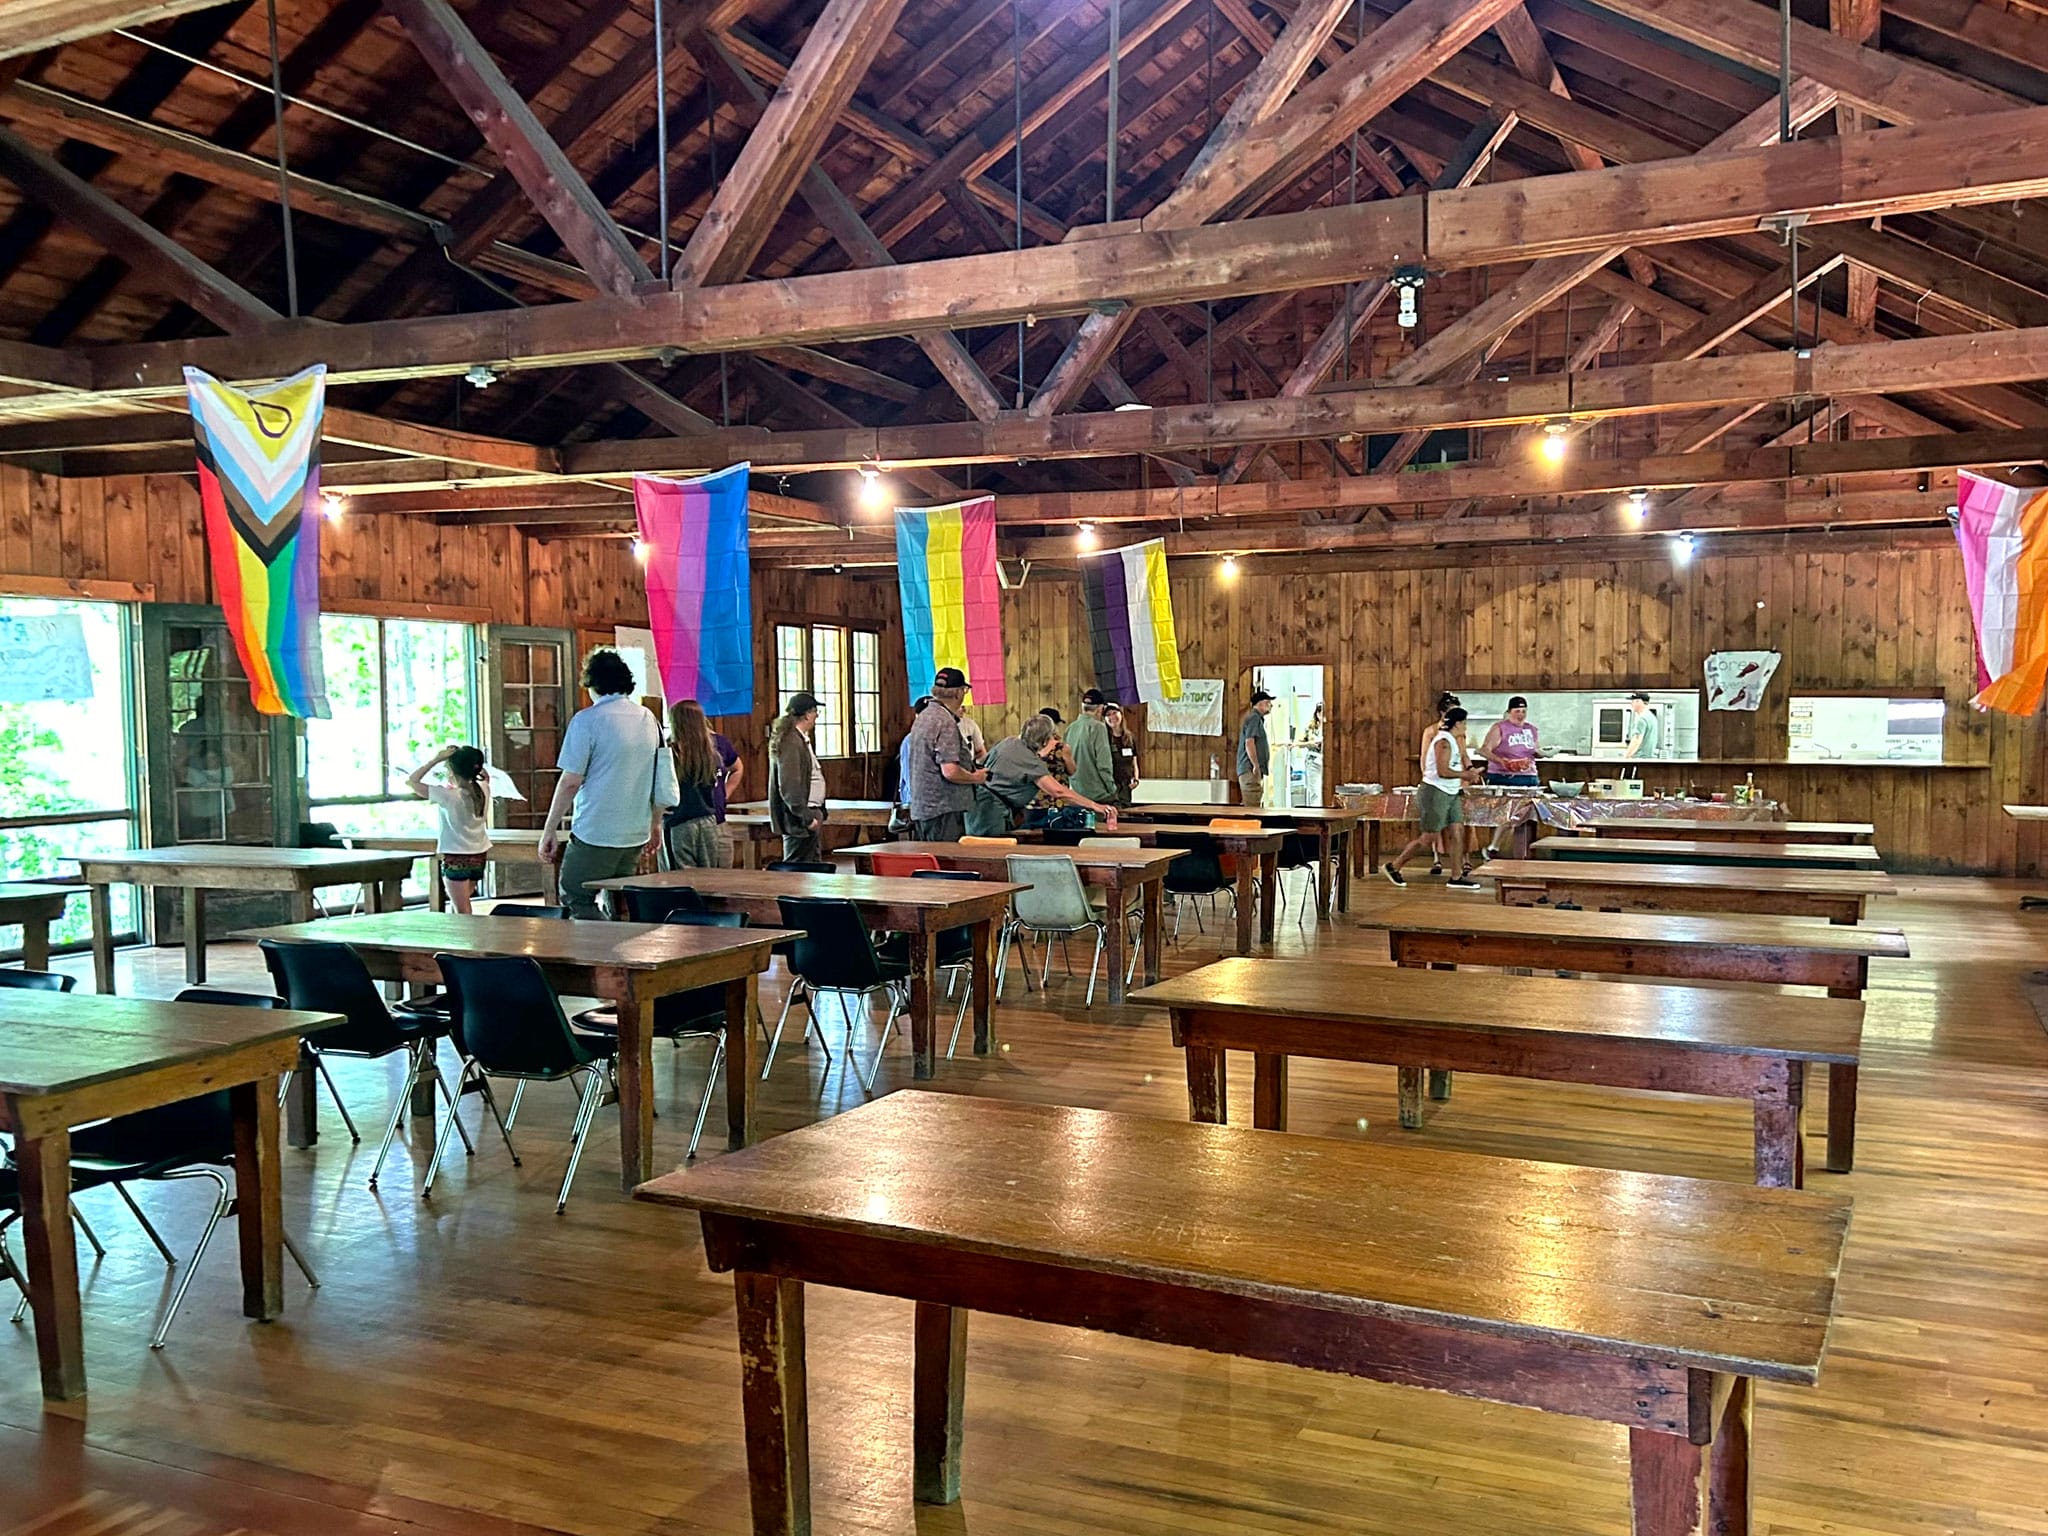 Large timber-framed dining hall with pride flags hanging from rafters